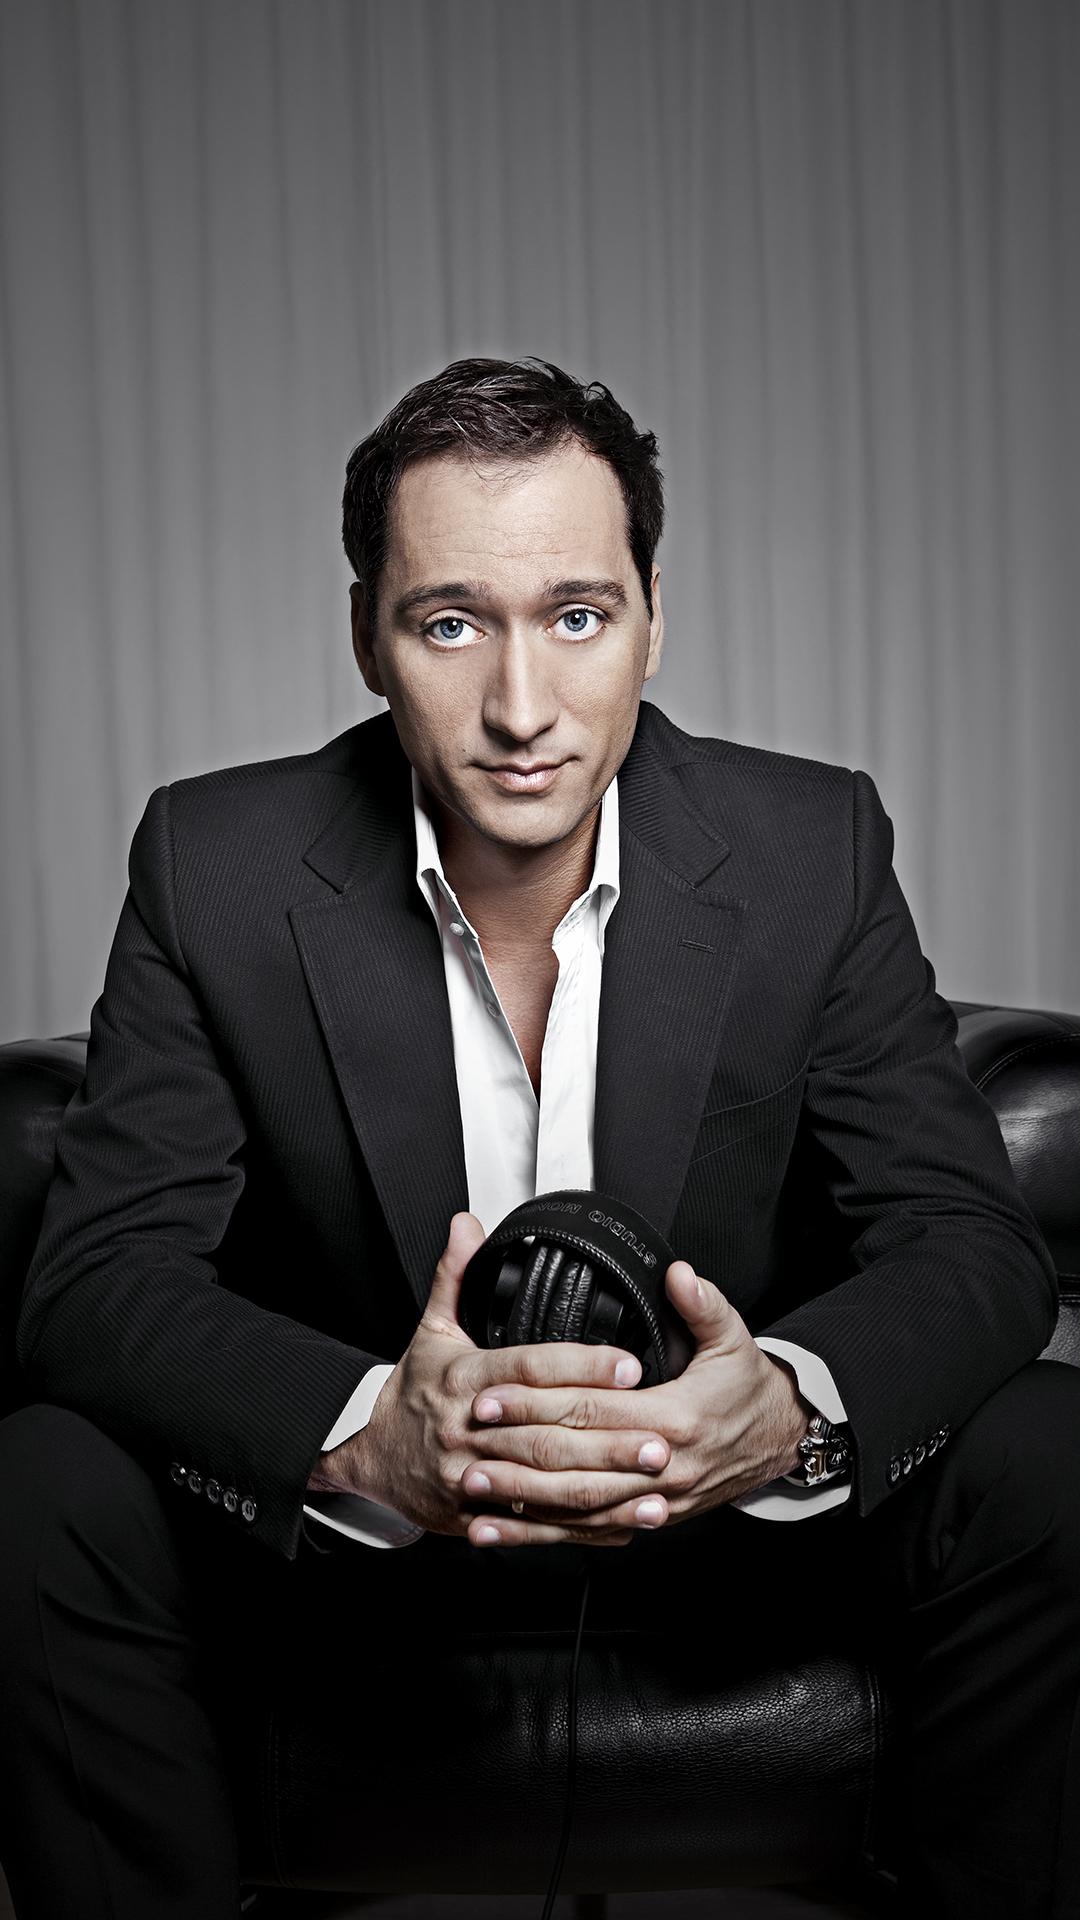 Paul Van Dyk htc one wallpaper, free and easy to download